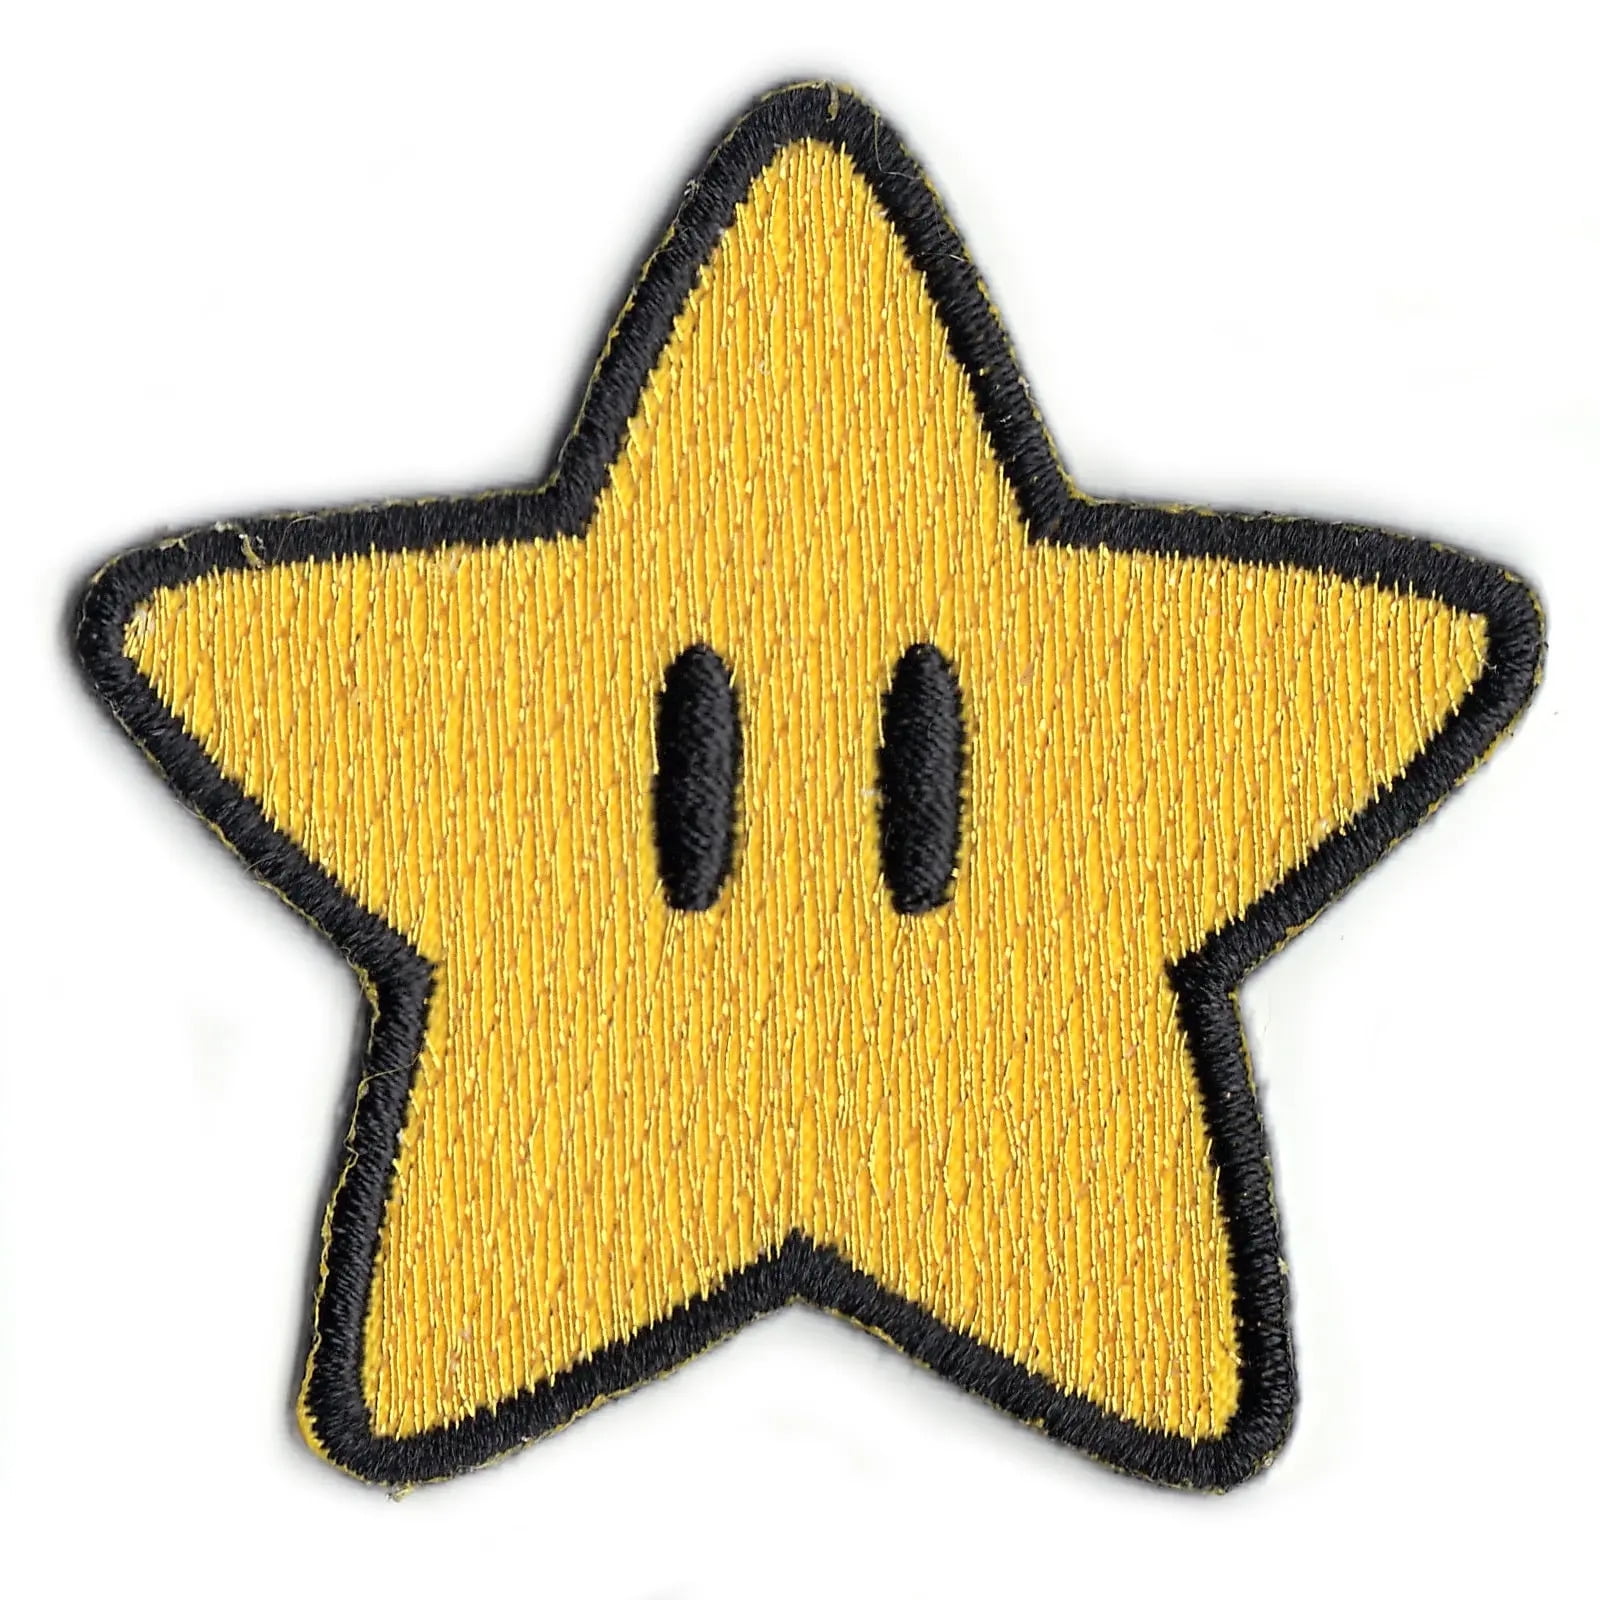 The Star Power of Mario Game Iron on Patch.